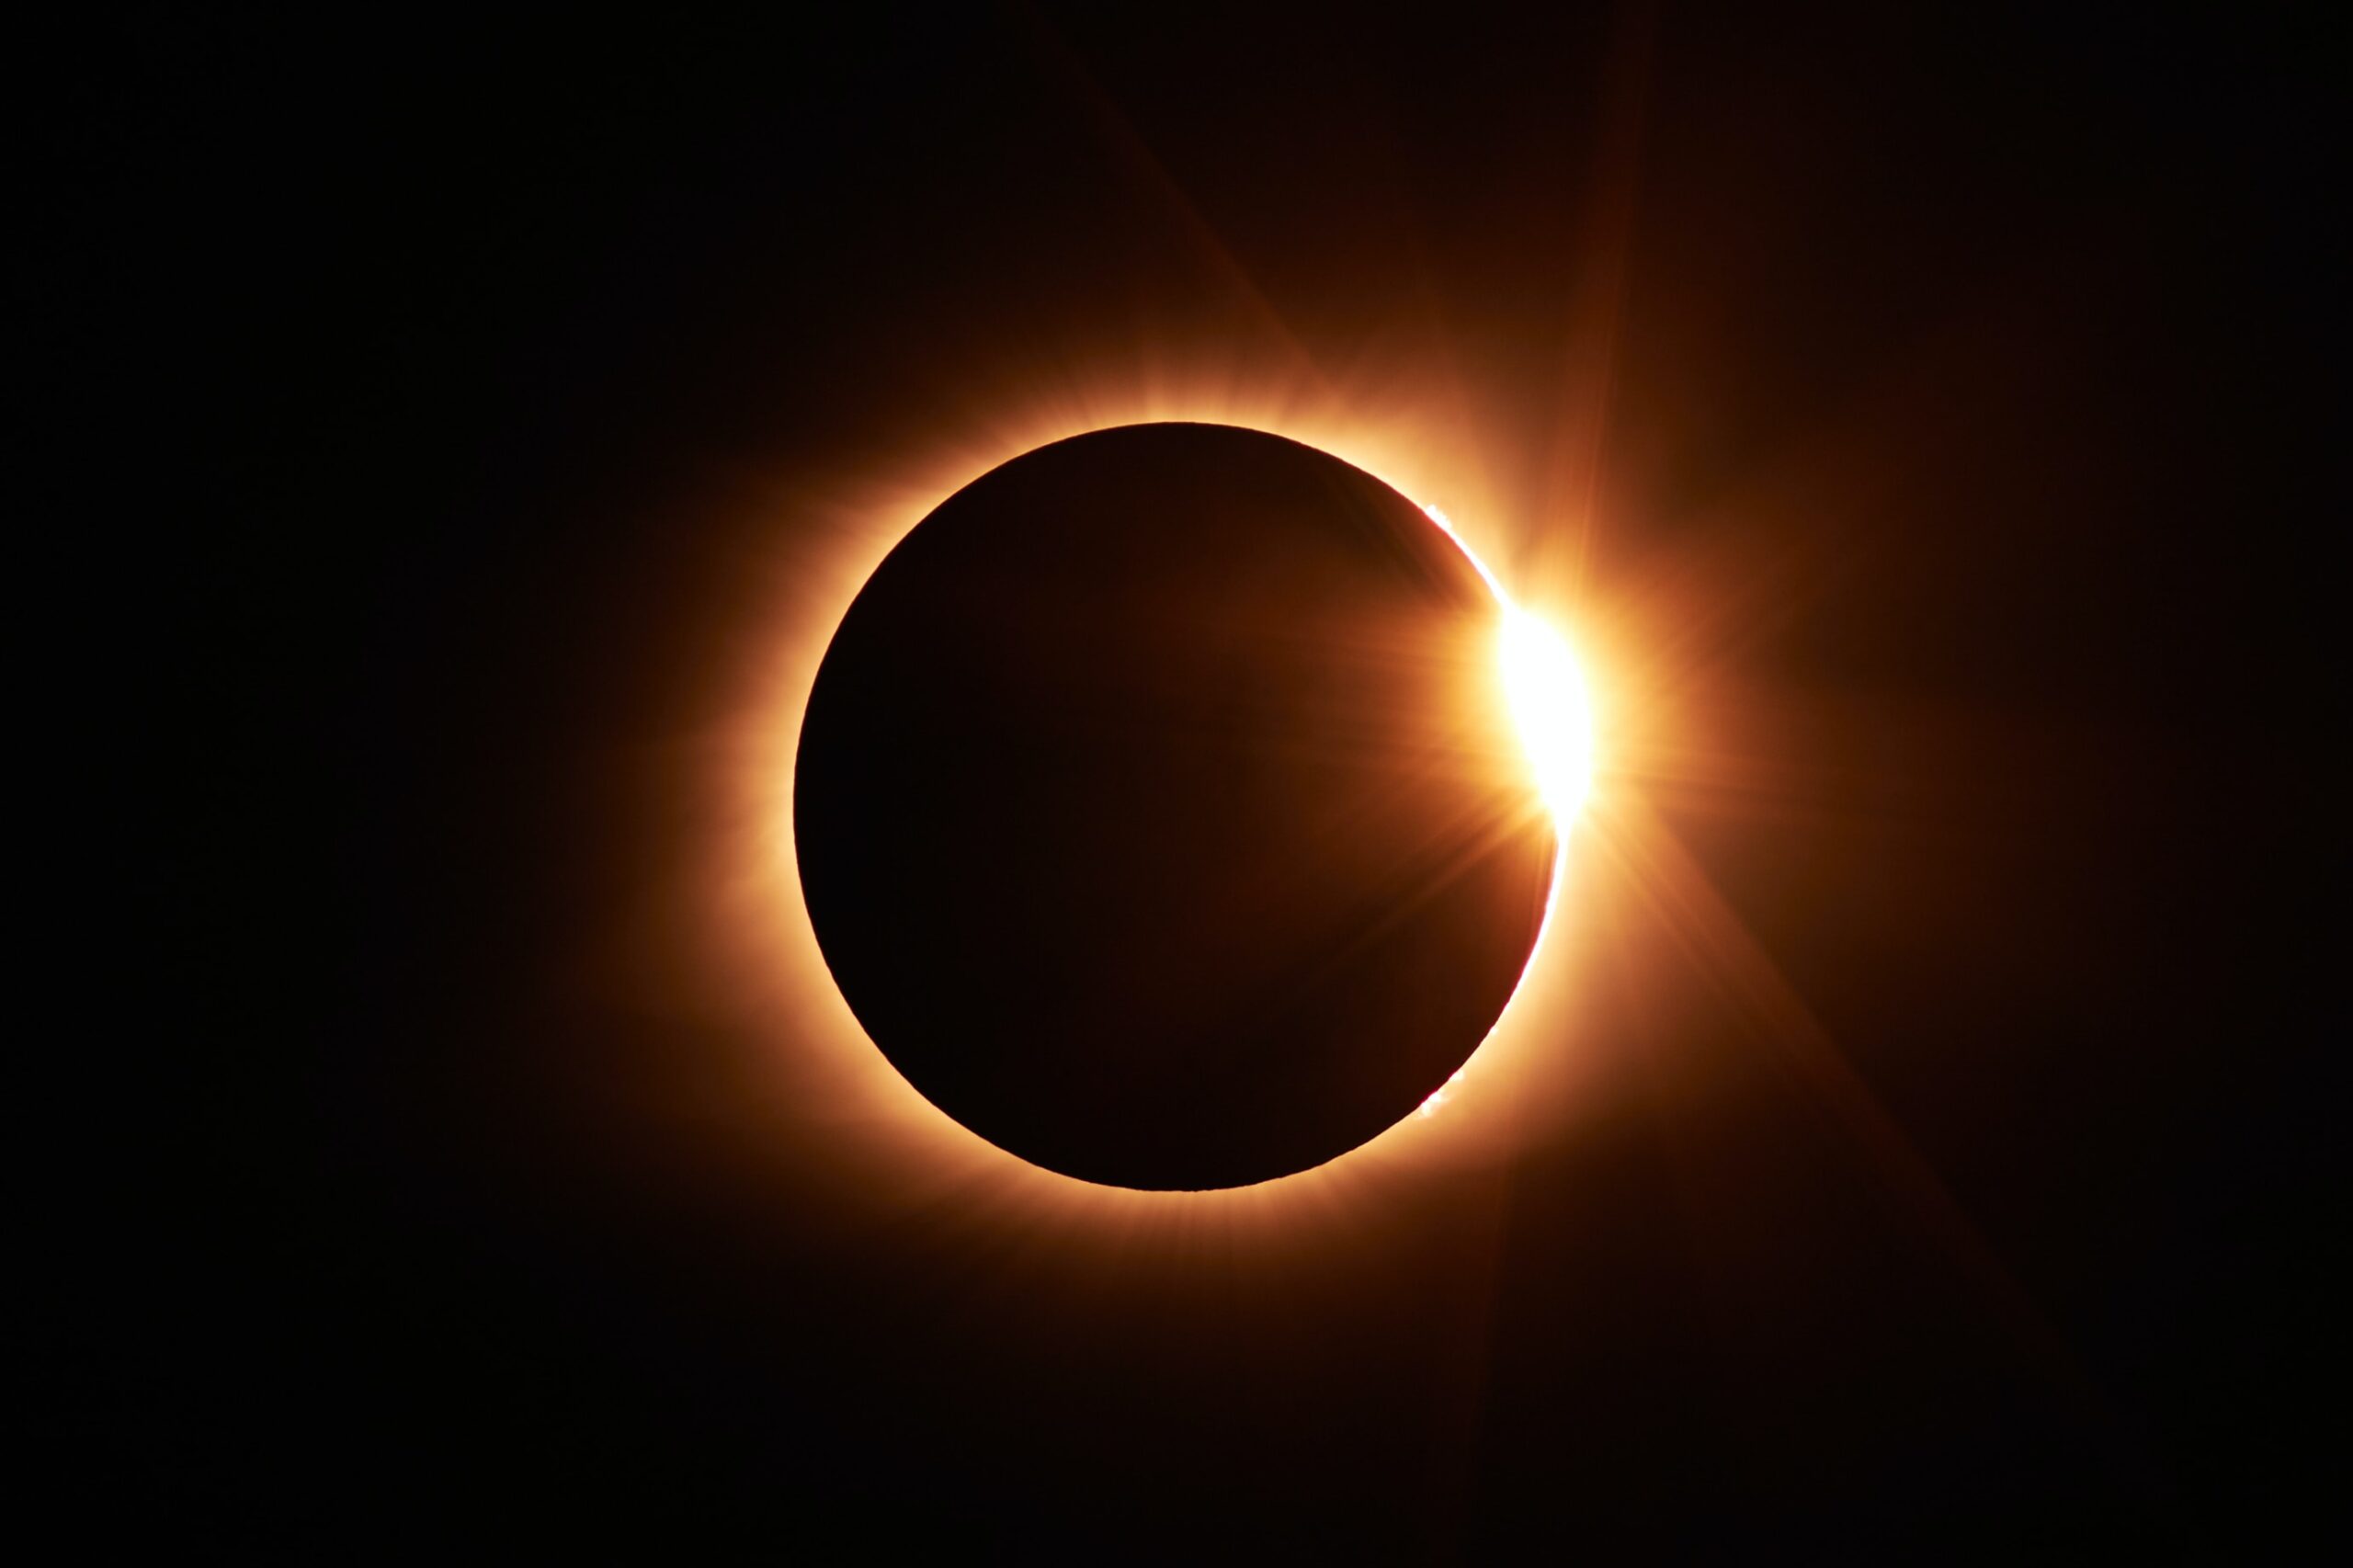 Where and How to Watch 2 Upcoming Eclipses